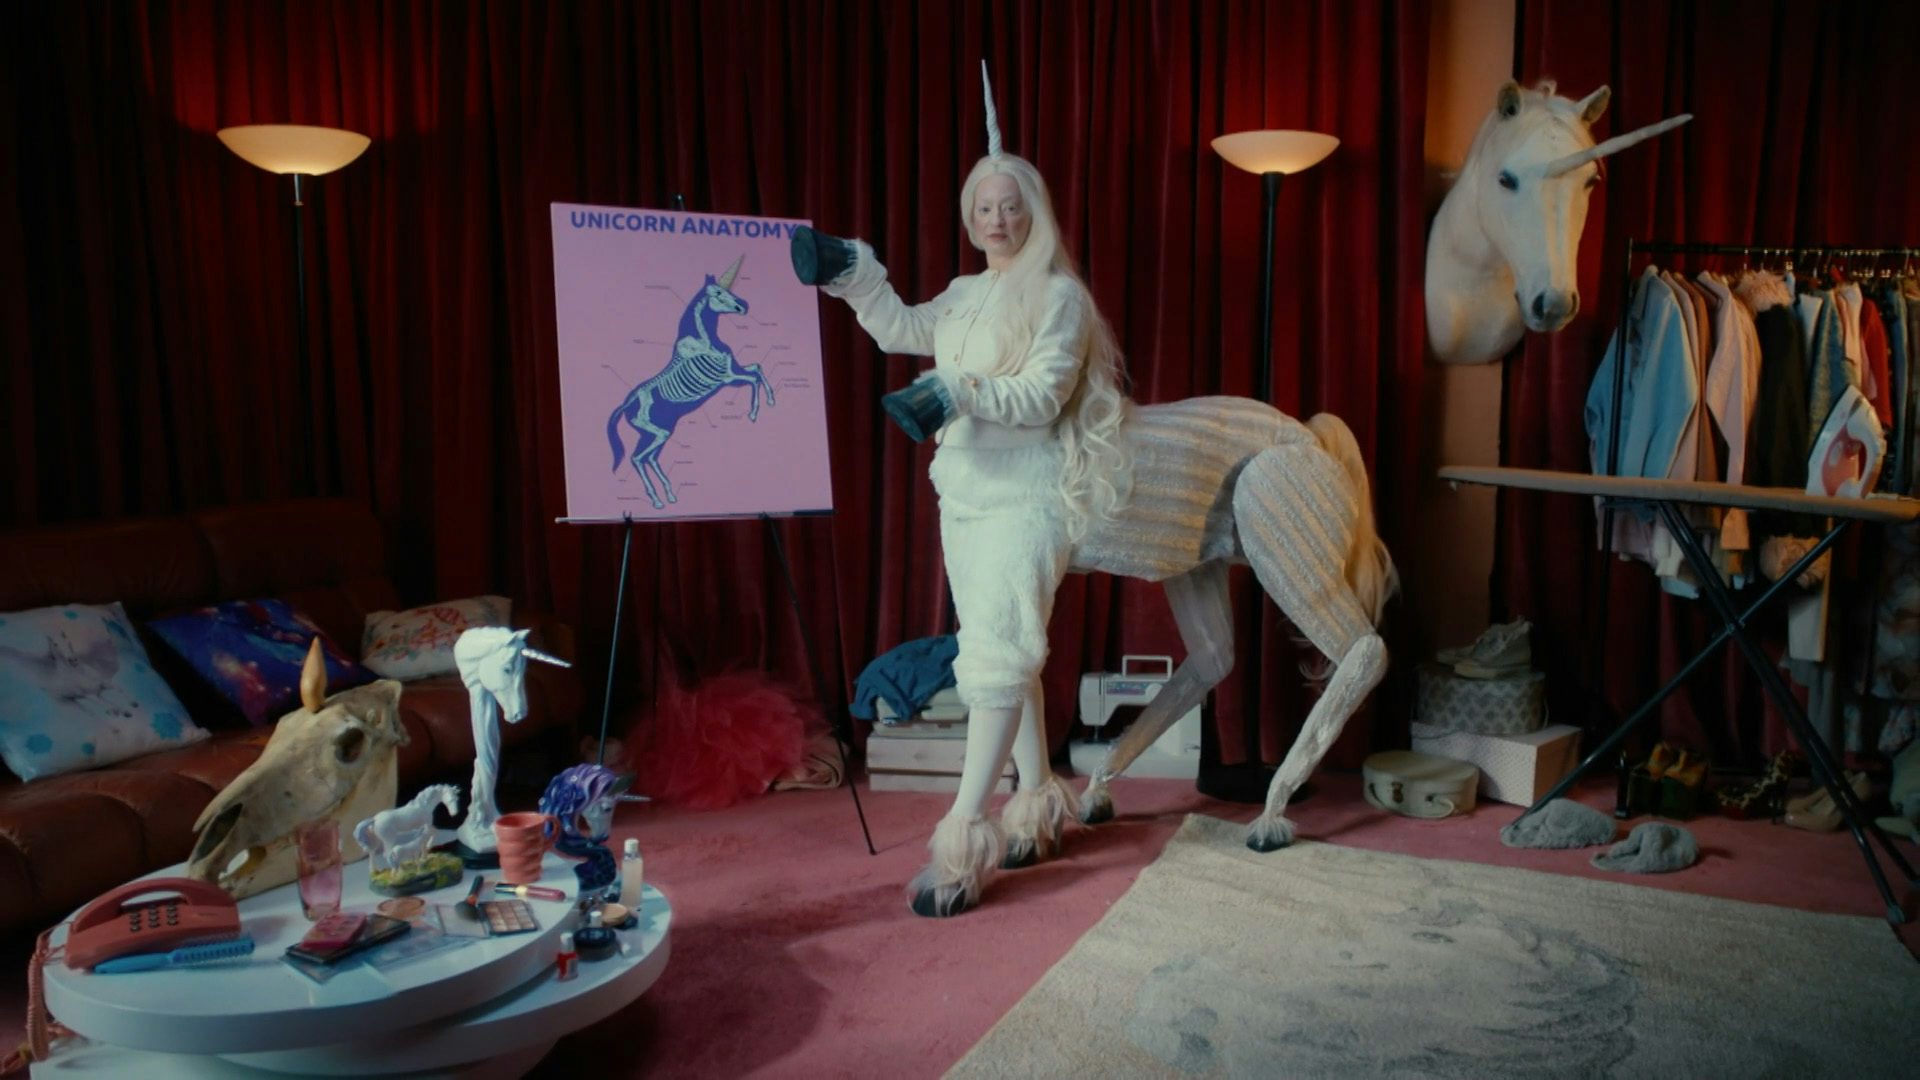 Still image from a BBC Bitesize campaign showing a person dressed in a unicorn costume doing a presentation